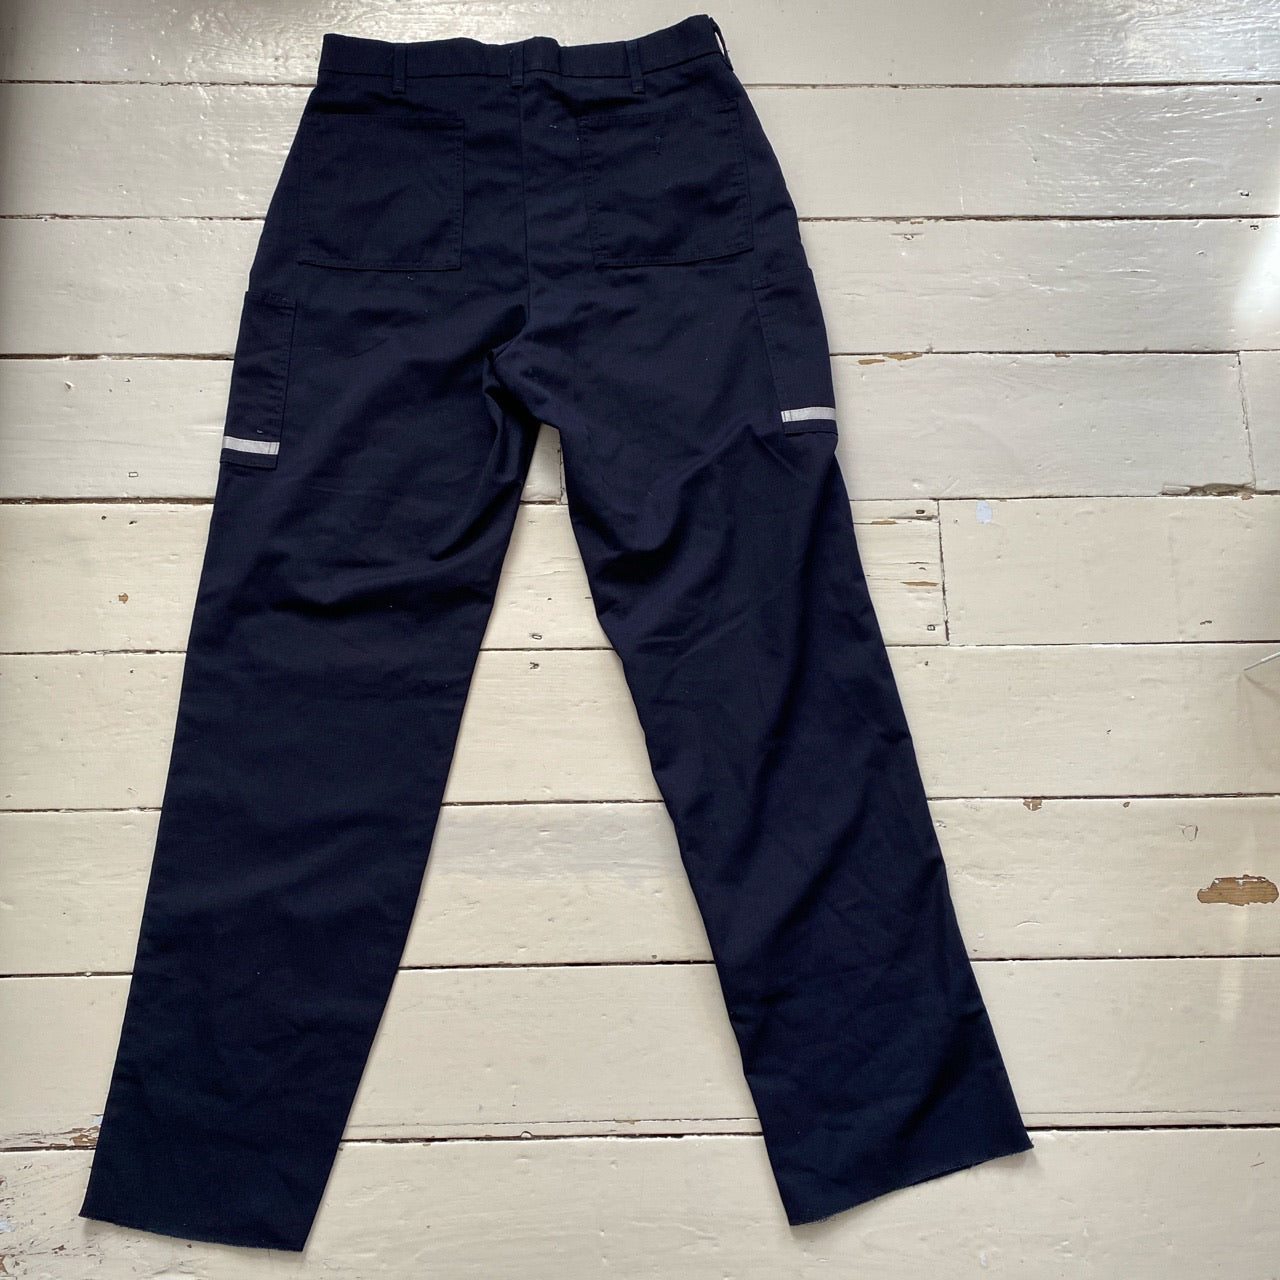 Fedex Cargo Style Trousers (38/35)